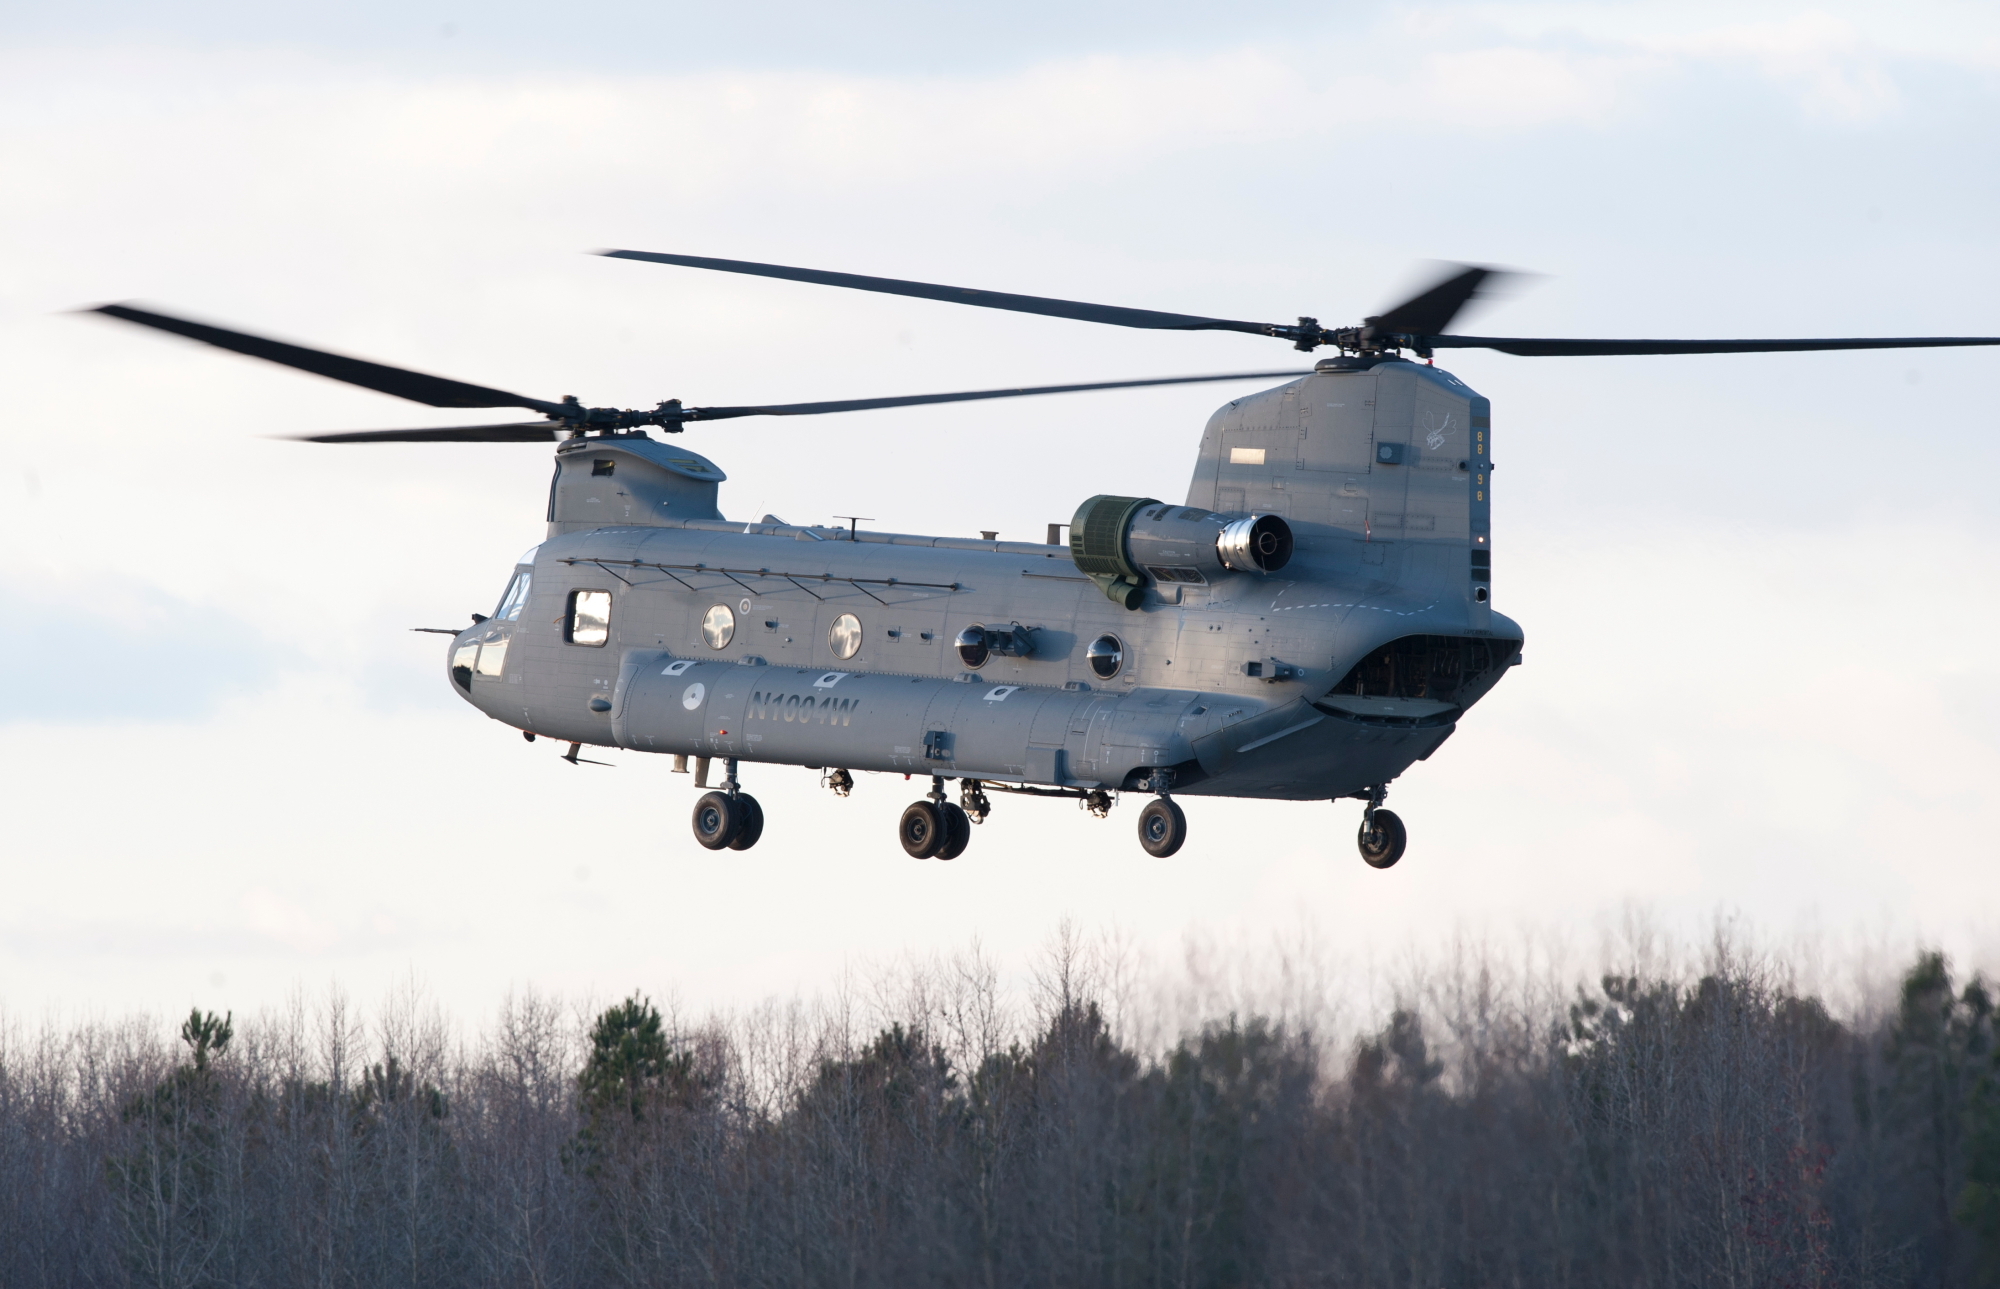 Royal Netherlands Air Force CH-47F Chinook helicopter. Click to enlarge.